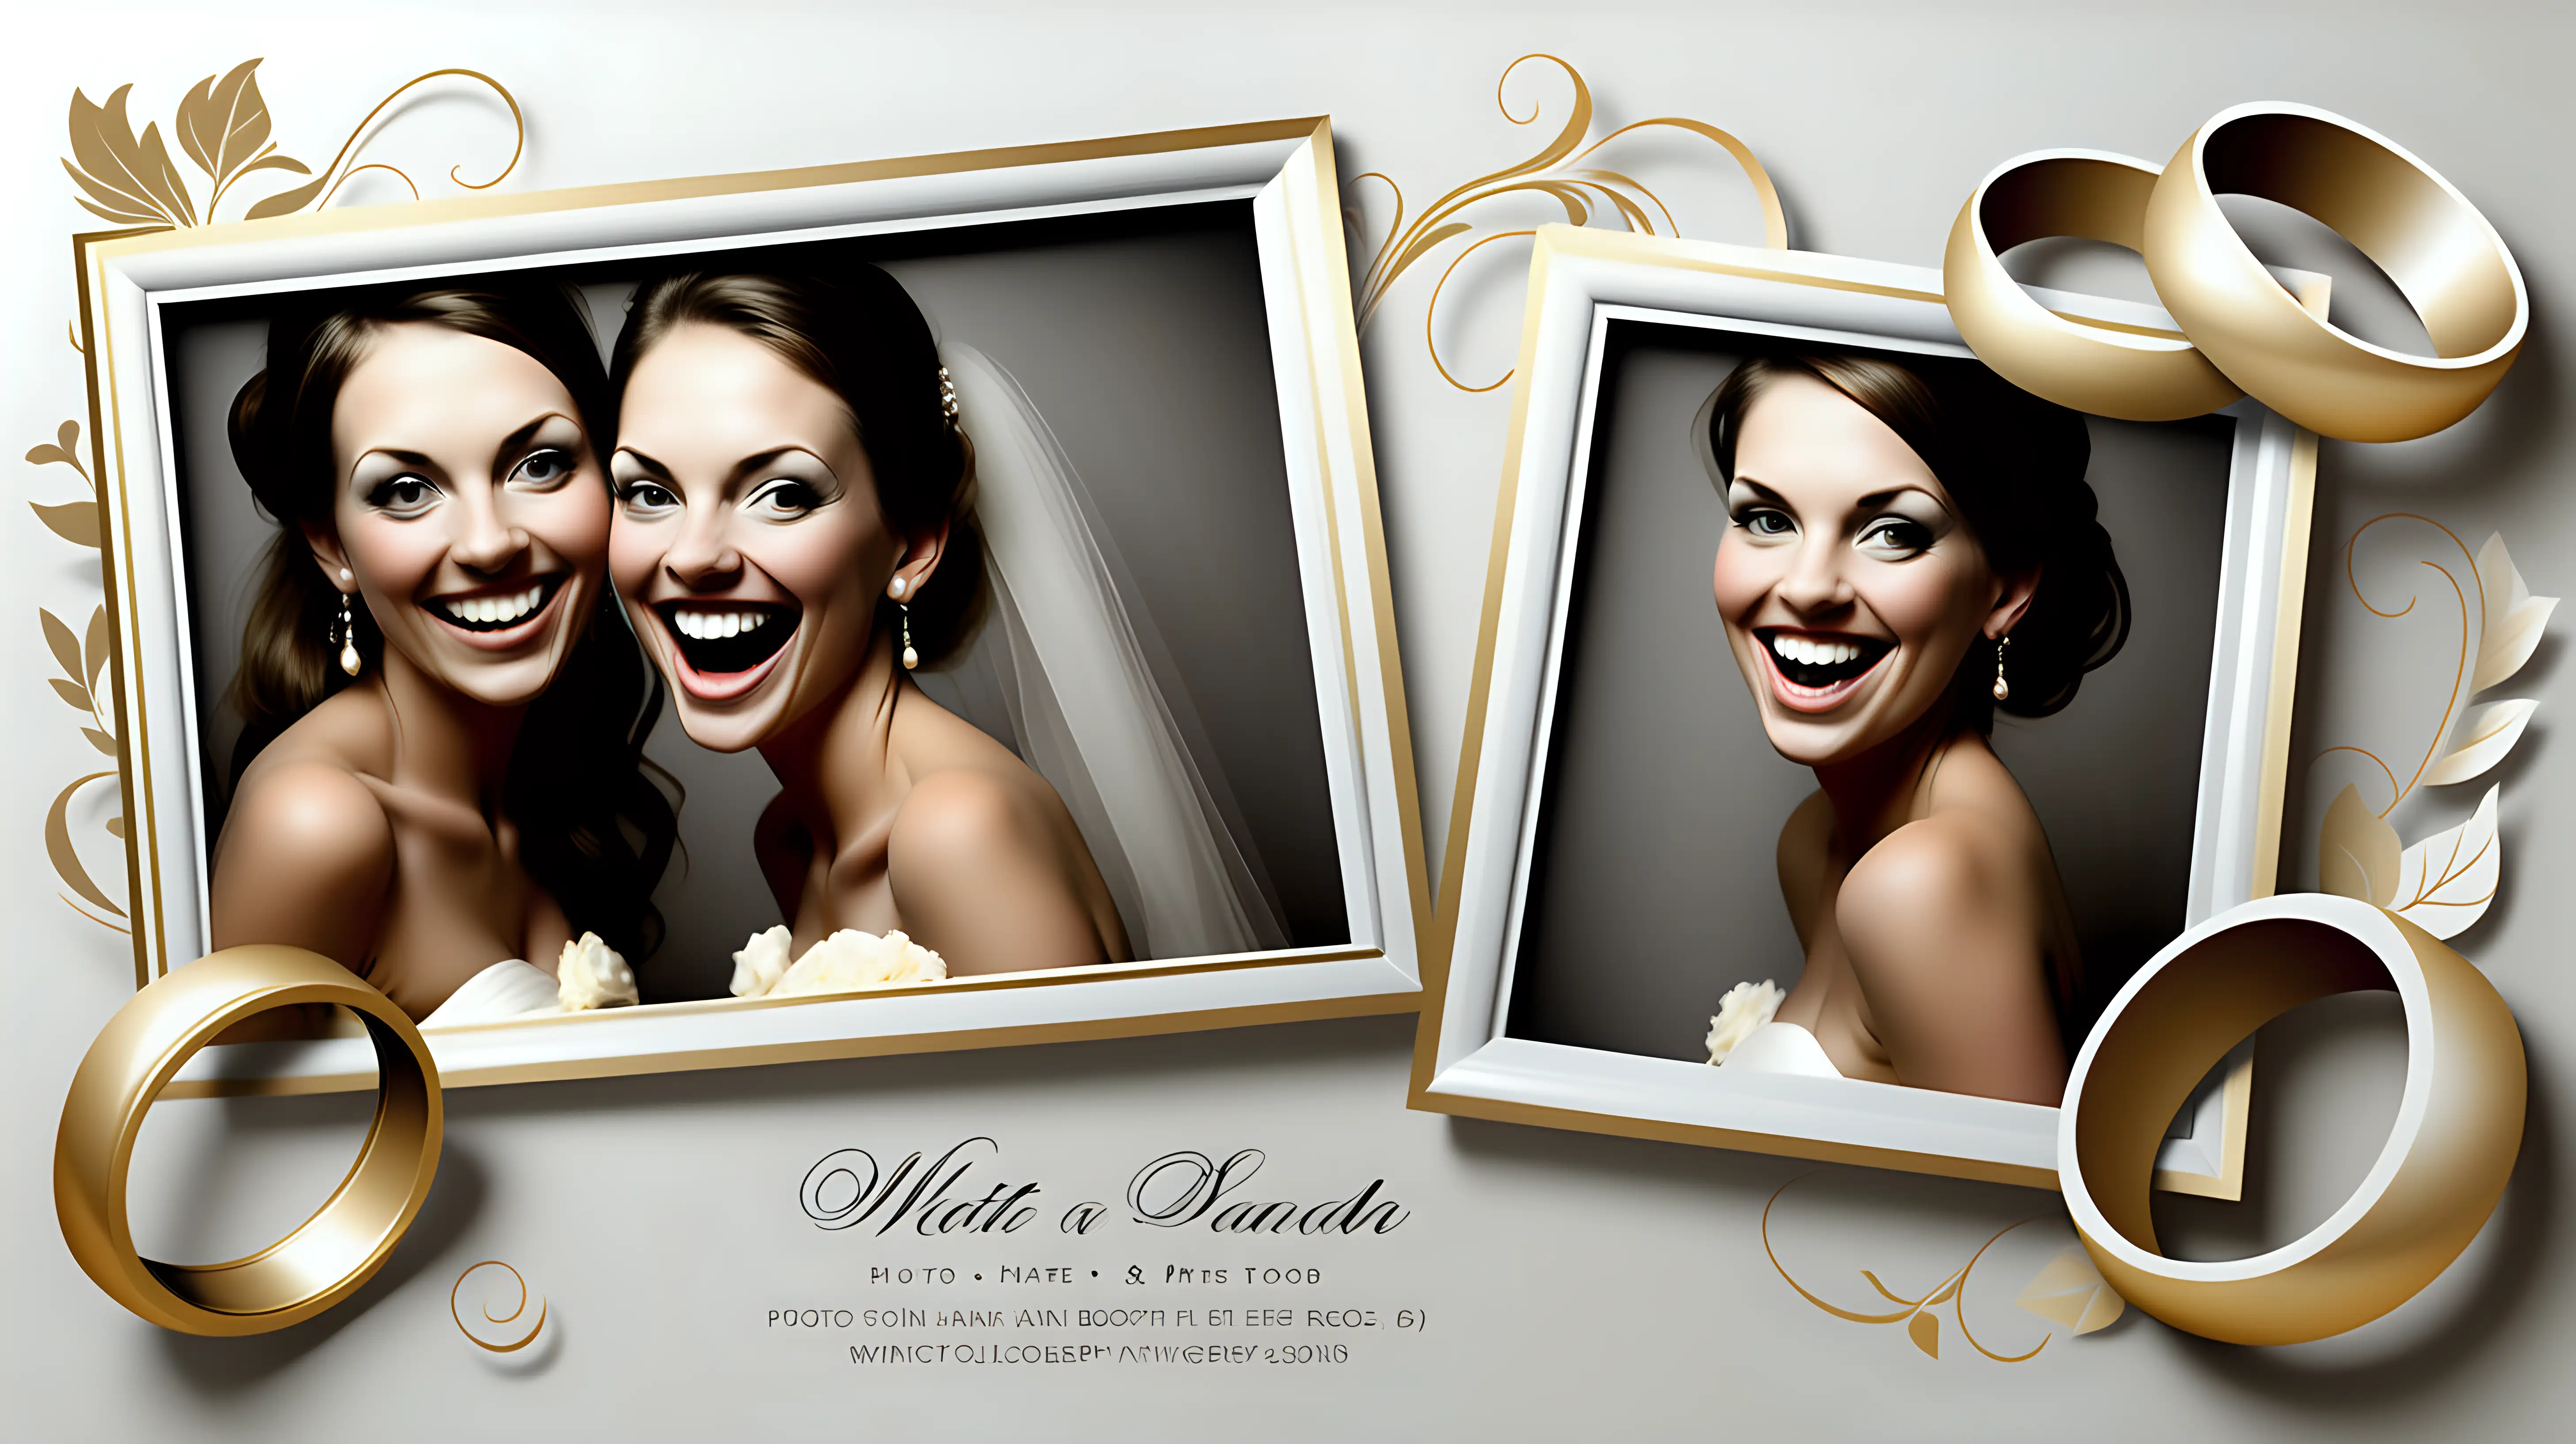 Elegant Wedding Photo Booth Template with Golden Rings